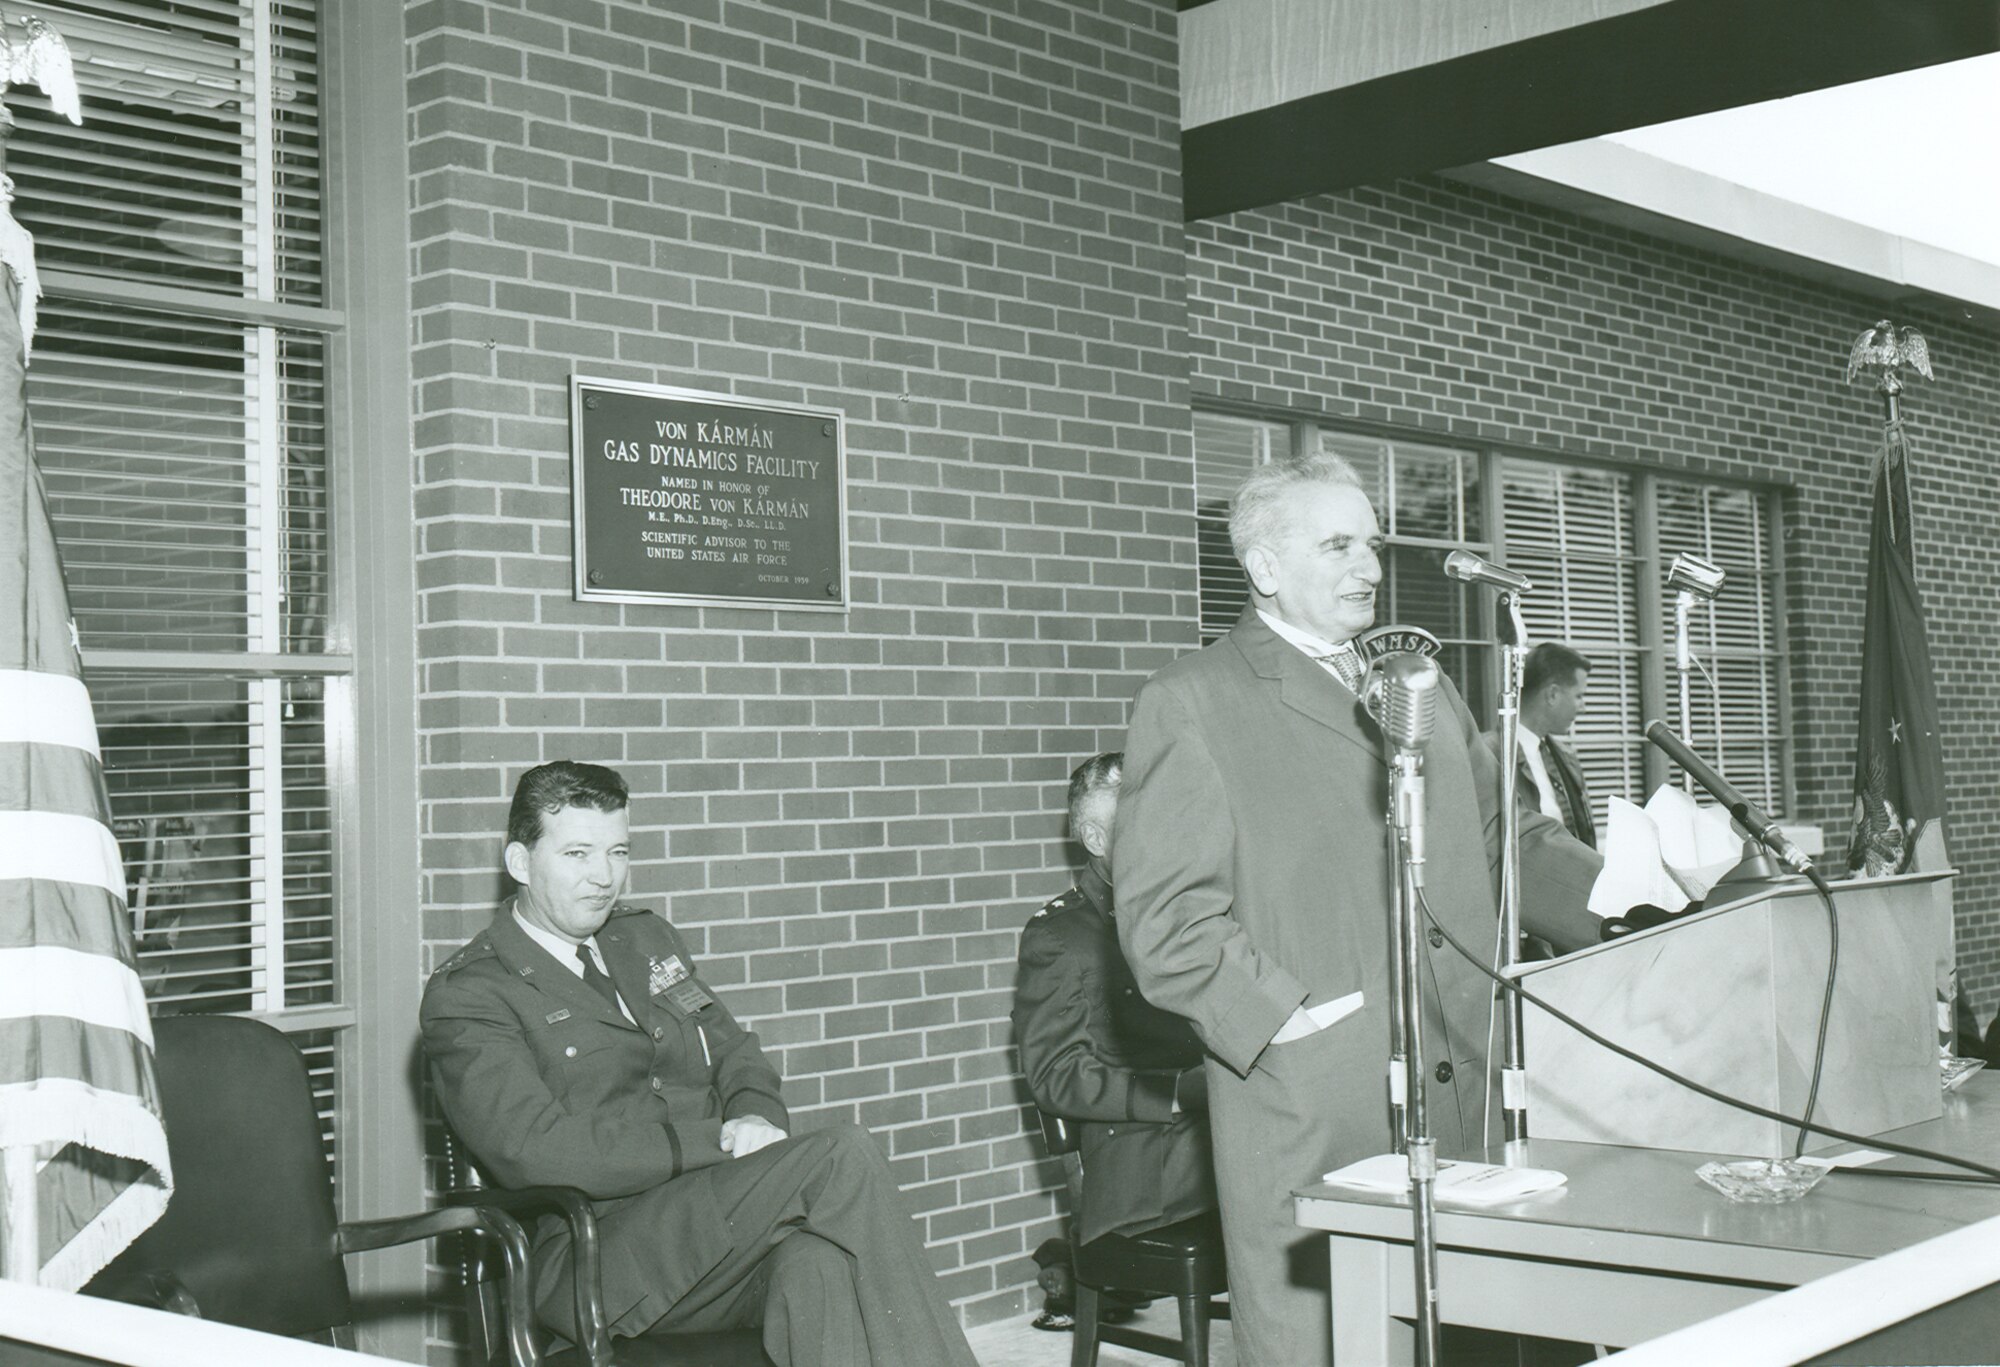 Dr. Theodore von Kármán speaks during the Oct. 30, 1959, ceremony to dedicate the Gas Dynamics Facility at Arnold Air Force Base in his honor. Von Kármán helped provide the blueprint that led to the construction of Arnold Engineering Development Complex at Arnold AFB. Seated behind von Kármán is Gen. Bernard Schriever, then-commander of Air Force Systems. (U.S. Air Force photo)